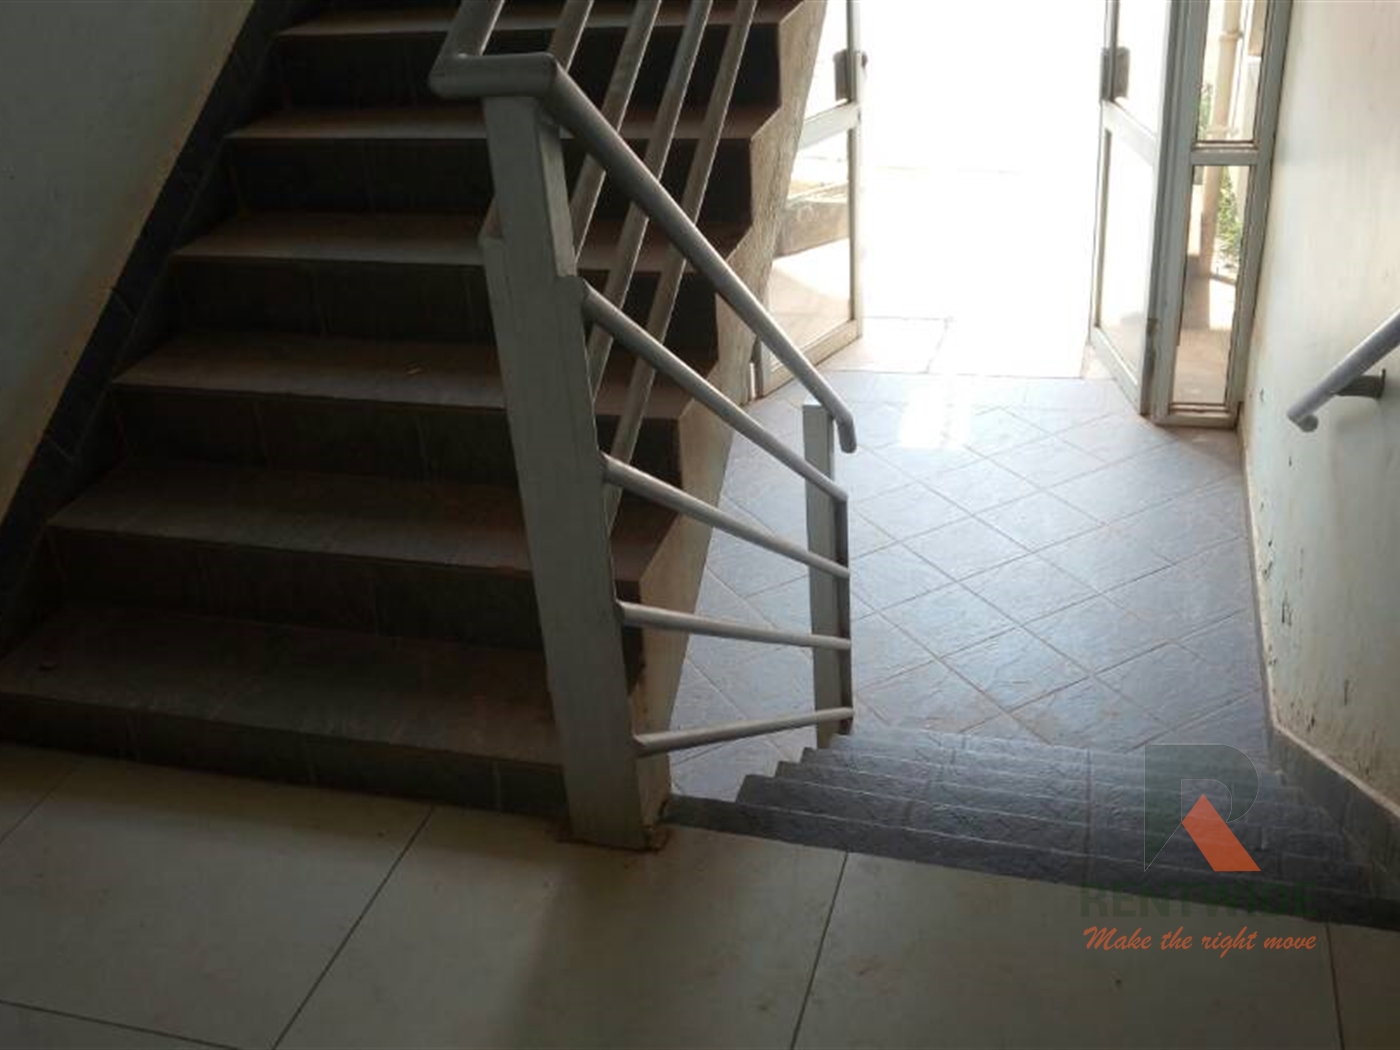 Office Space for rent in Nsambya Kampala